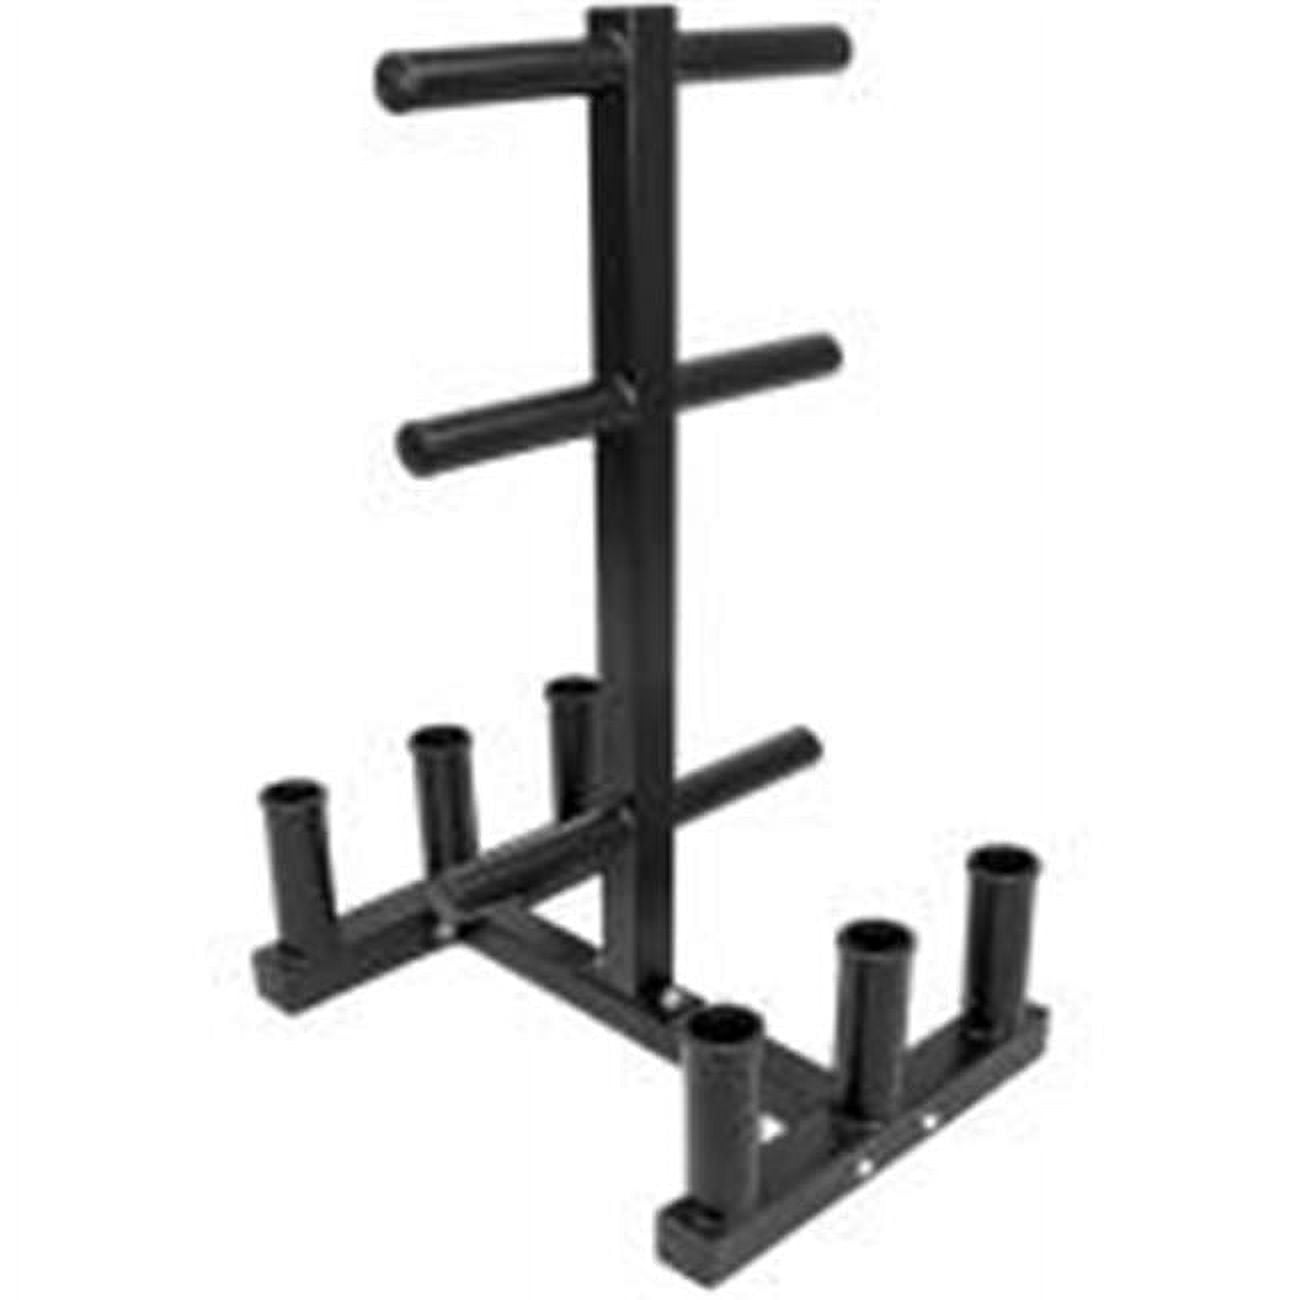 Picture of Brybelly Holdings SWGT-601 Olympic Plate Tree & Bar Holder